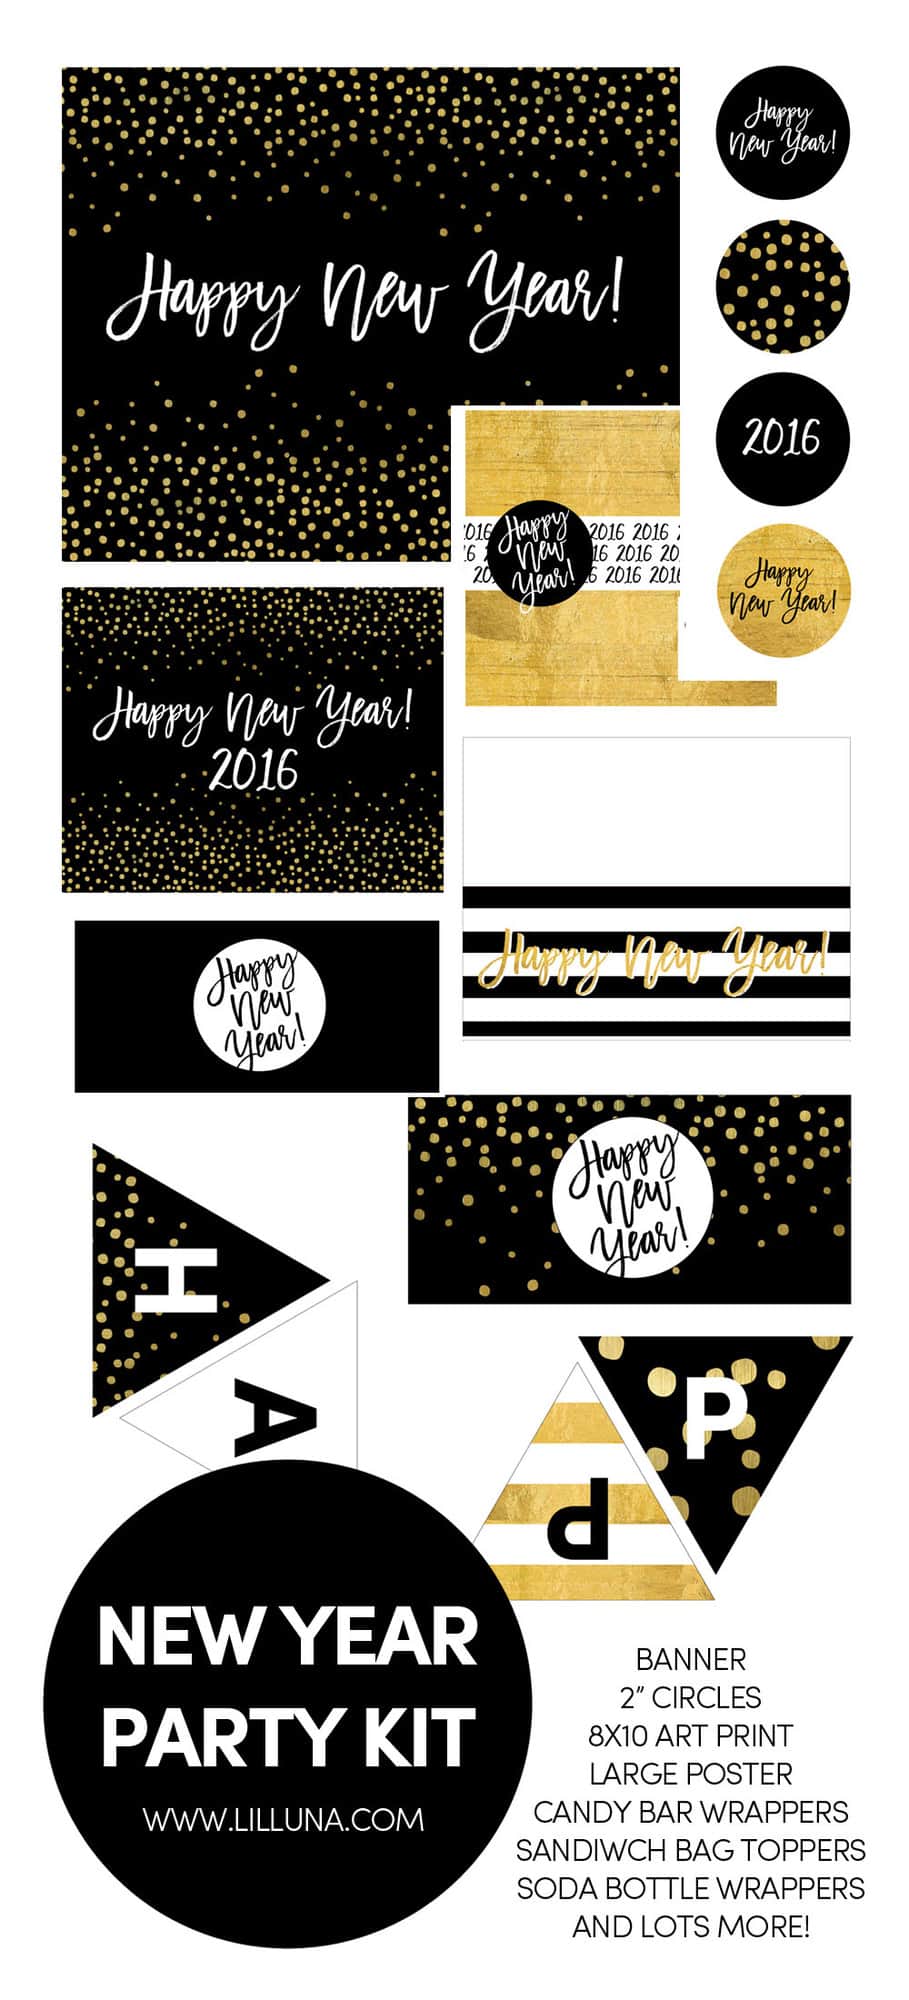 FREE New Year Party Kit Printables! All the fun prints you need for your New Year's party - a banner, toppers, poster, and more!